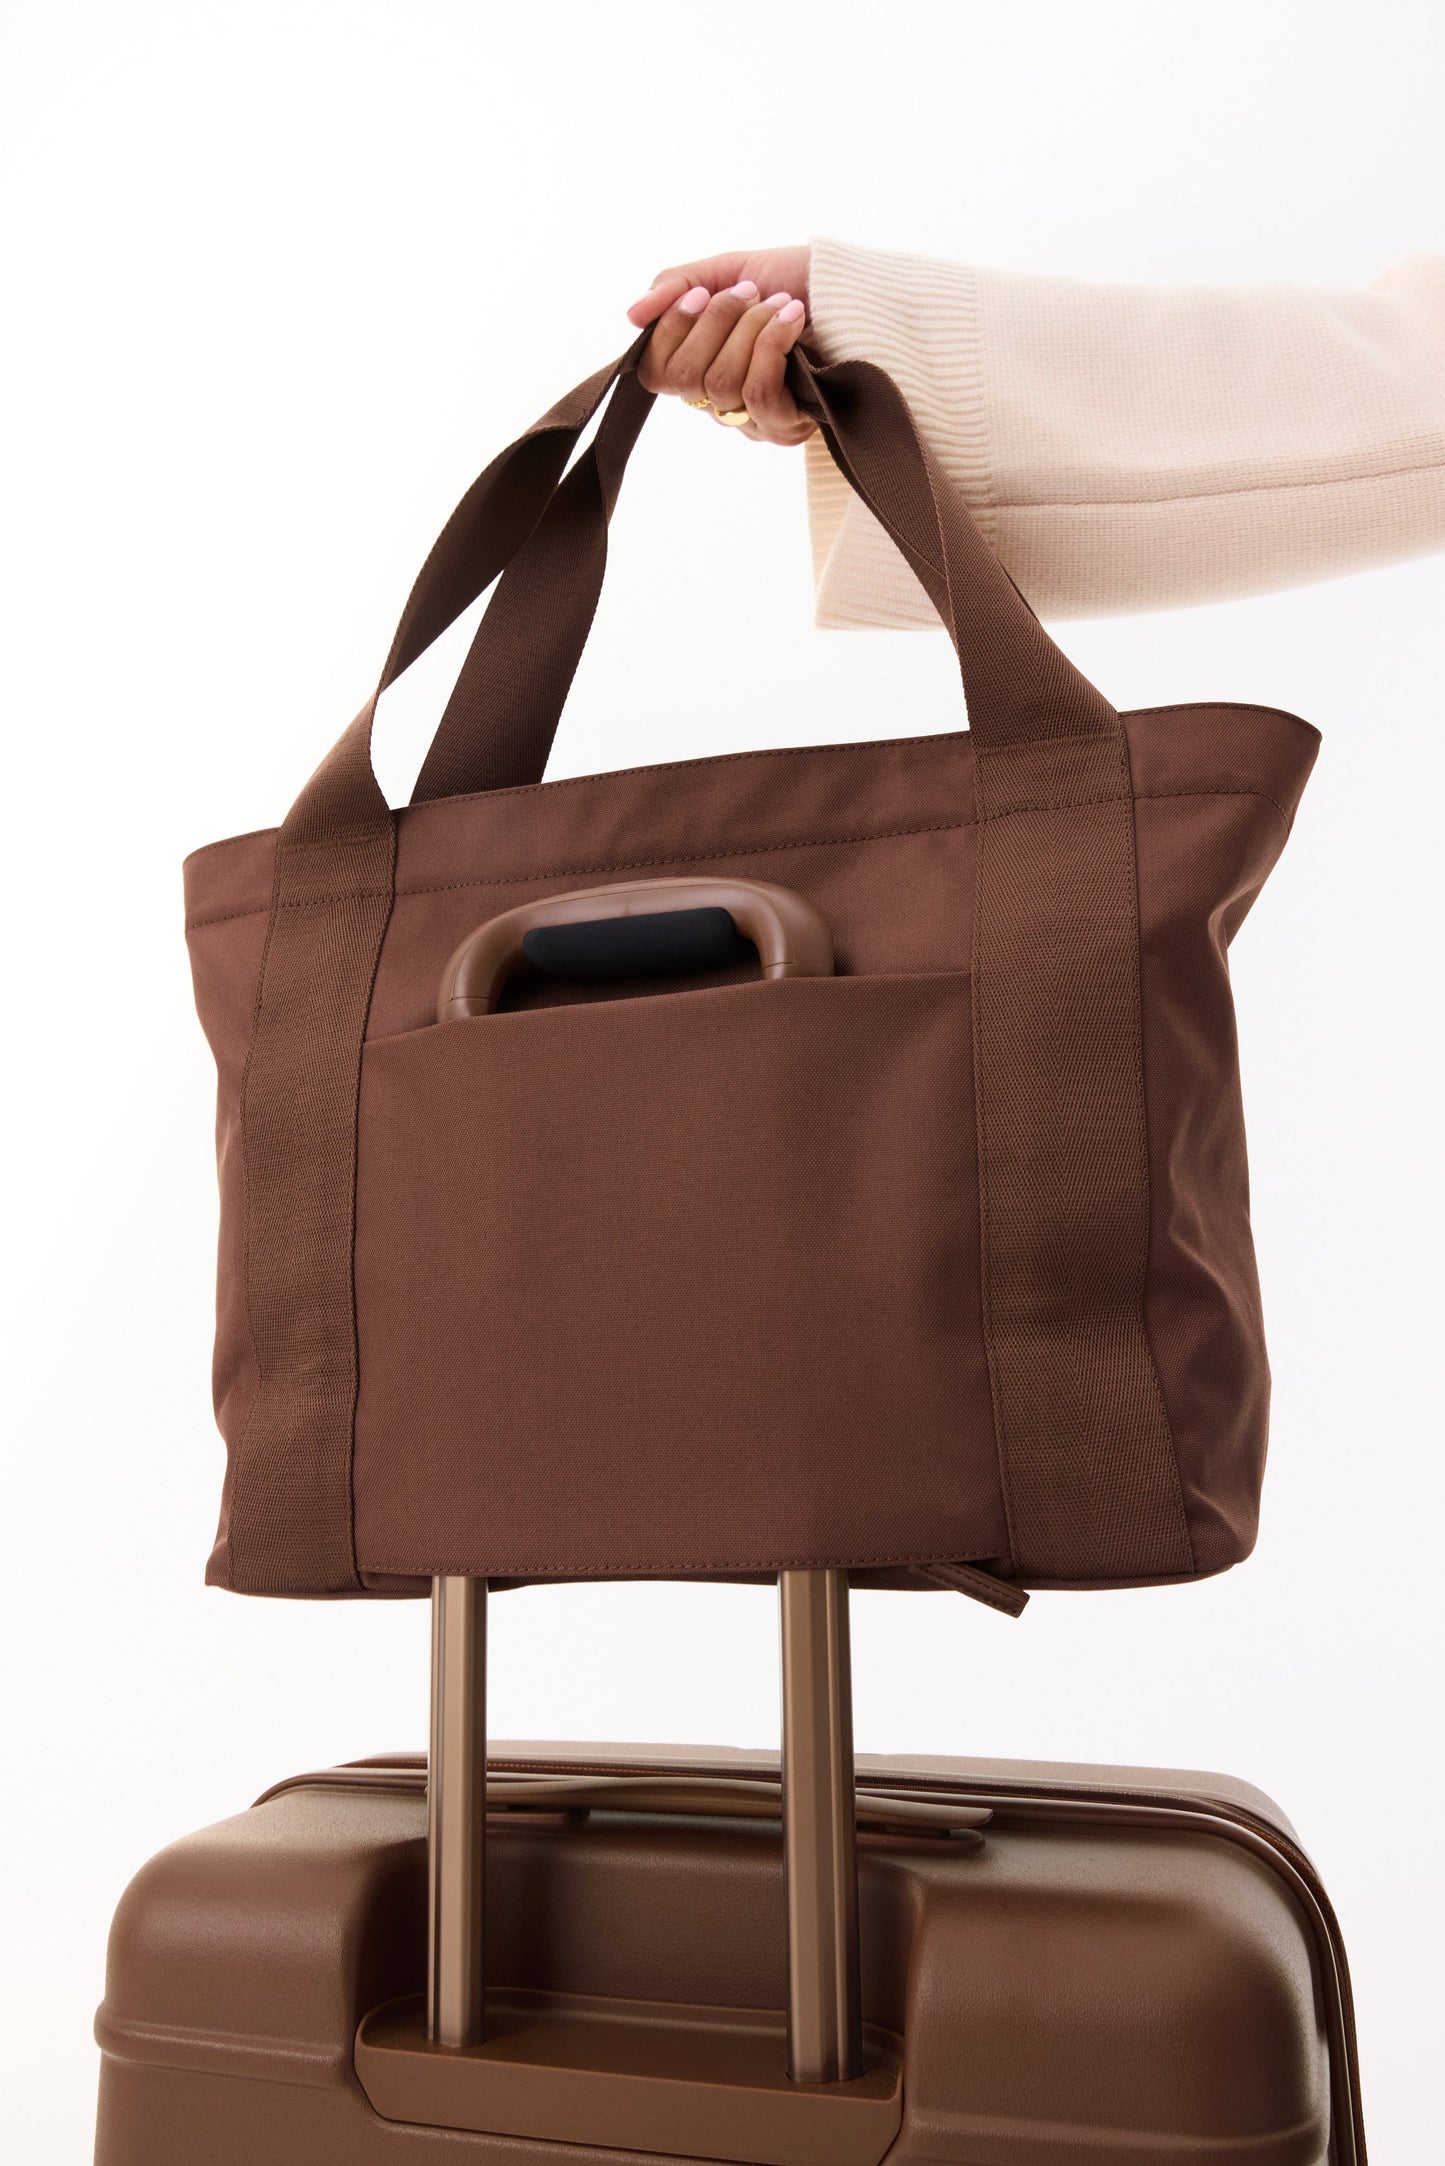 The BÉISics Tote in Maple